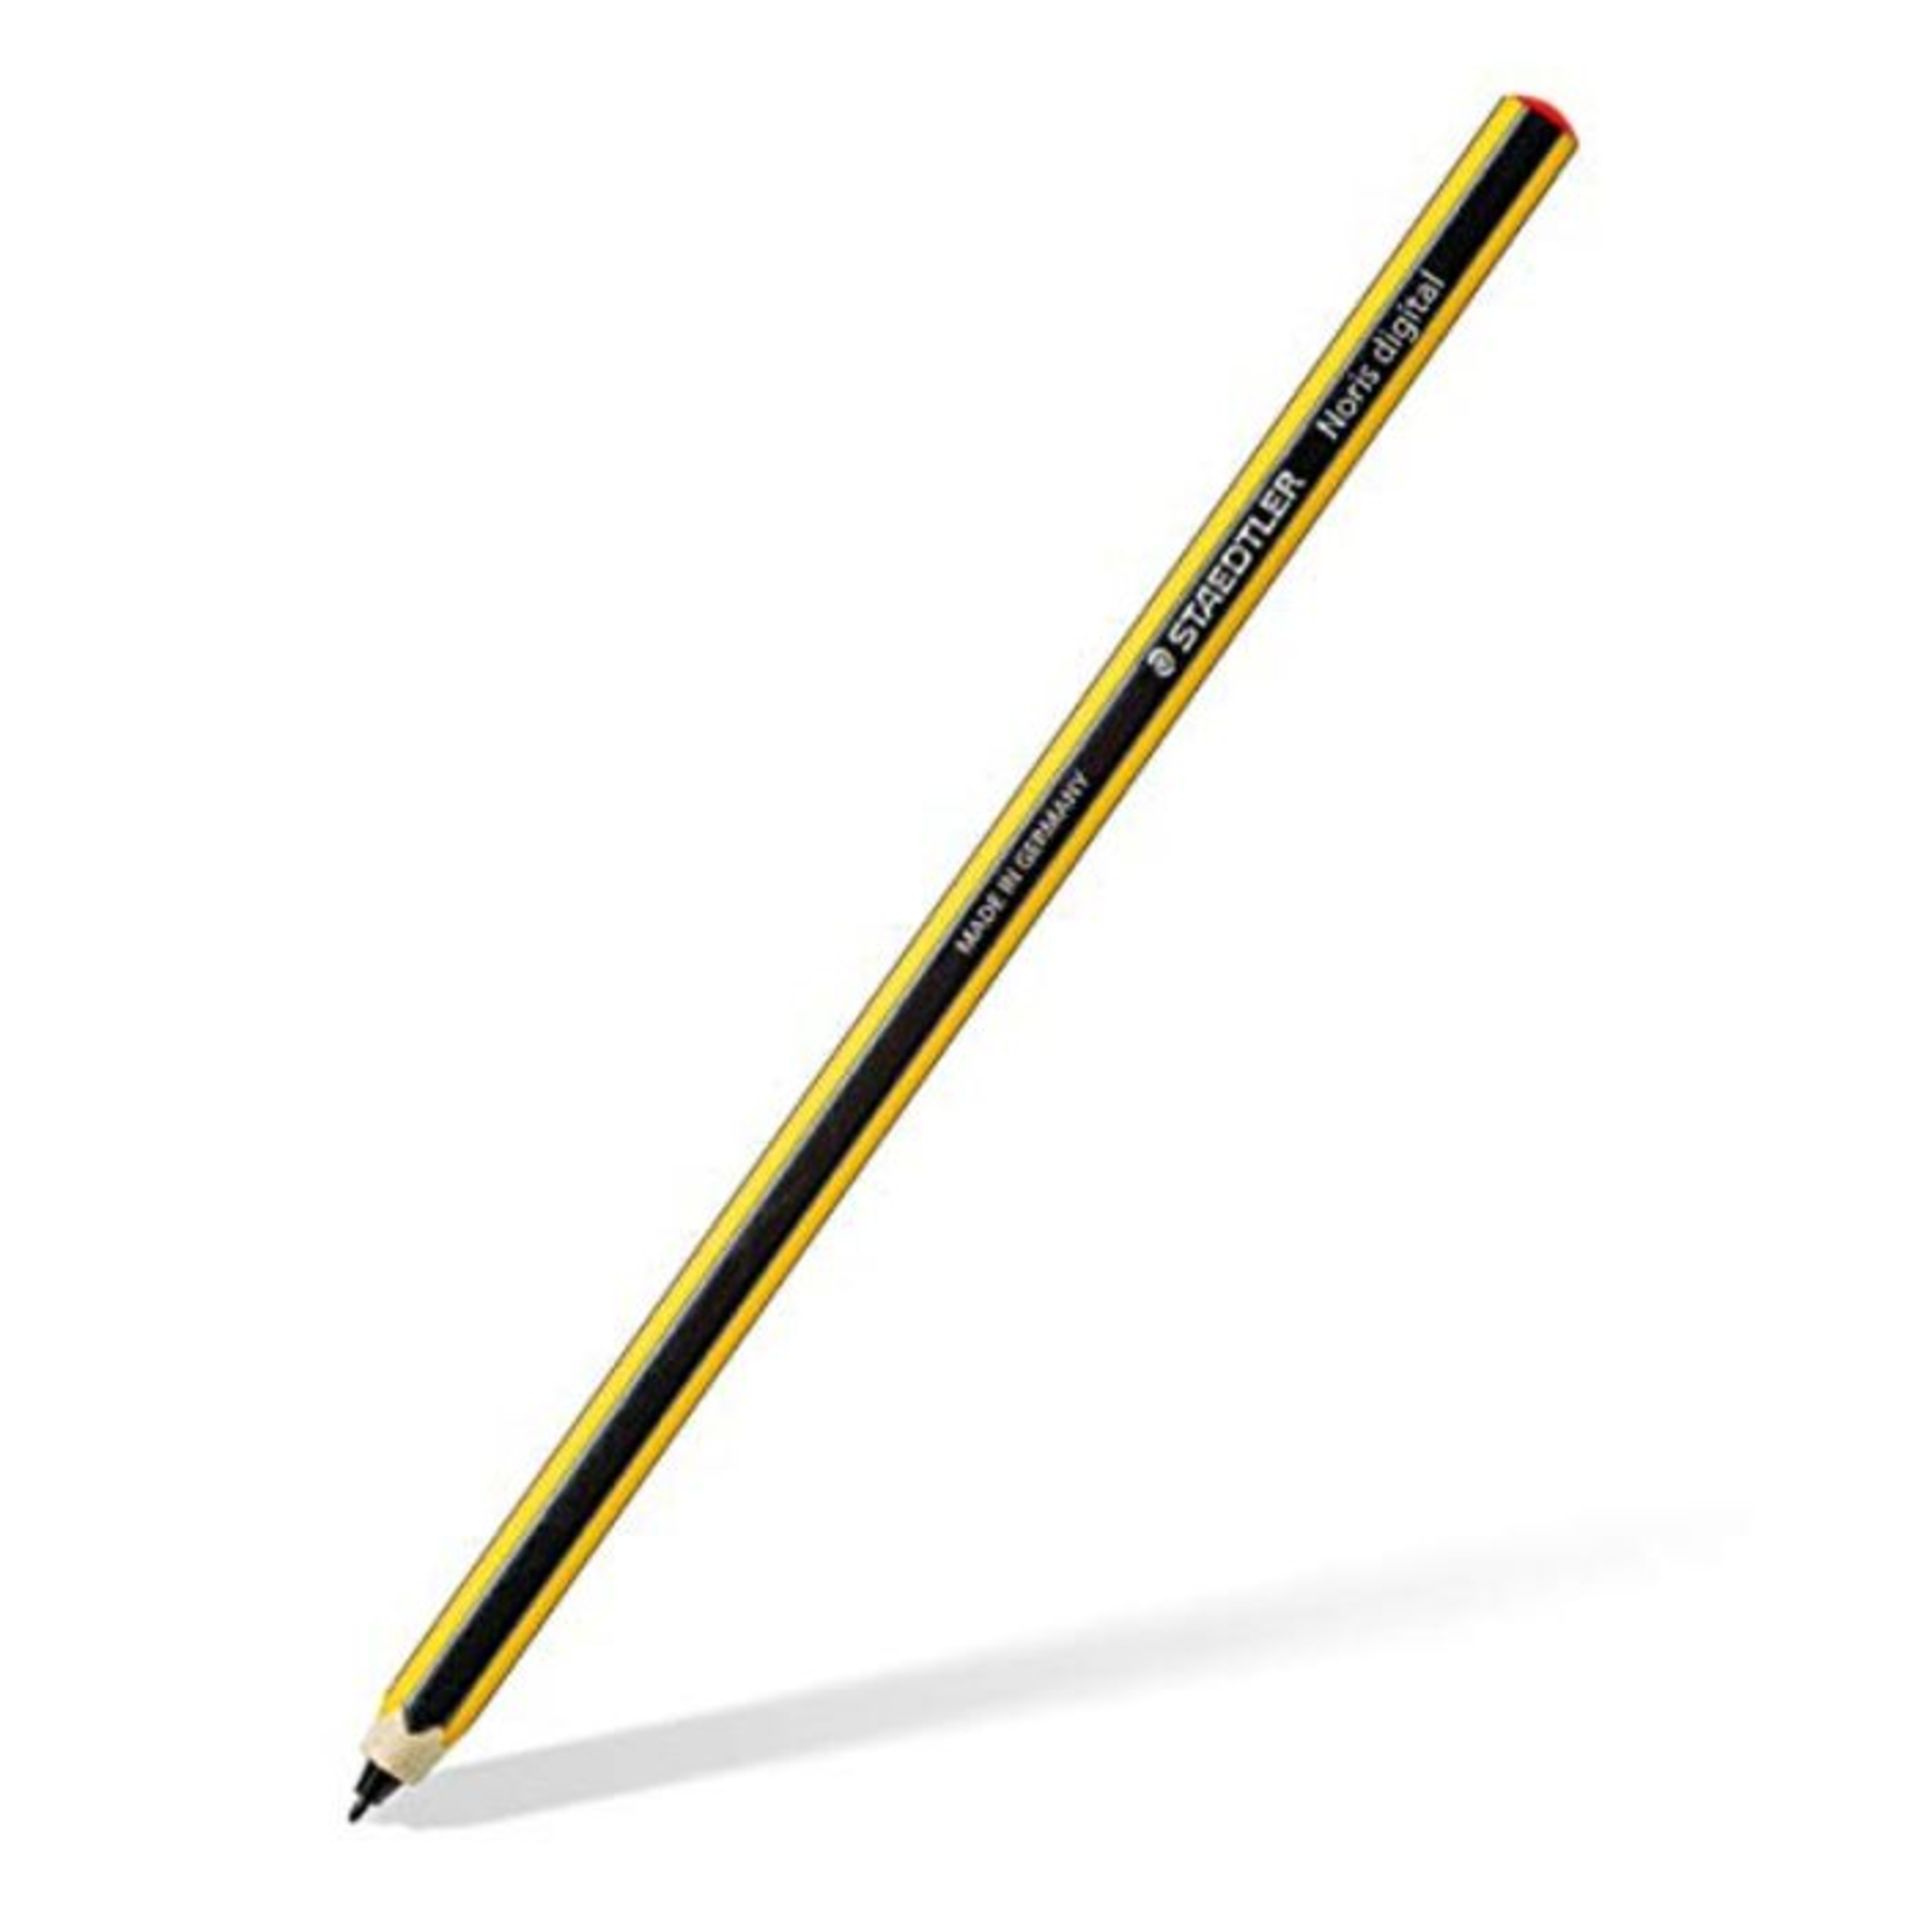 STAEDTLER Noris digital classic 180 22 EMR Stylus for Digital Writing and Drawing on E